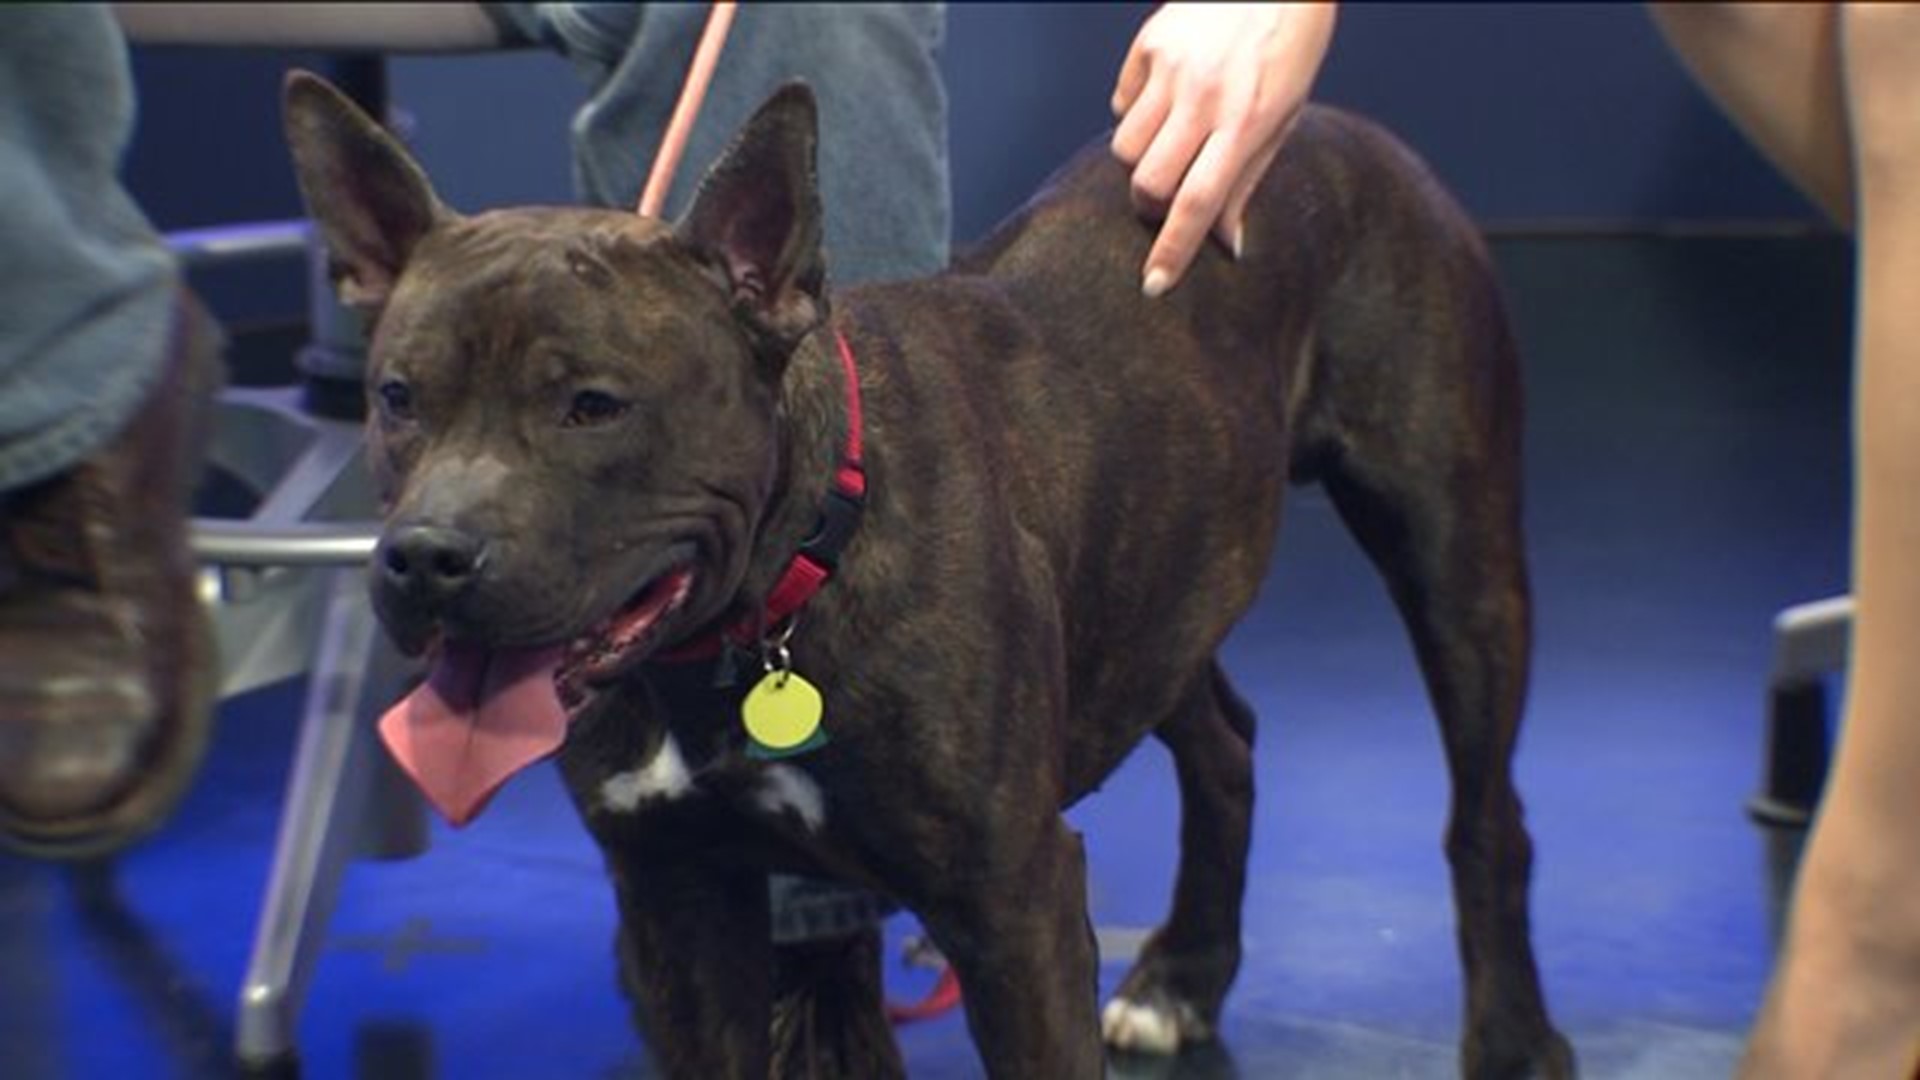 Pet of the week - Muse